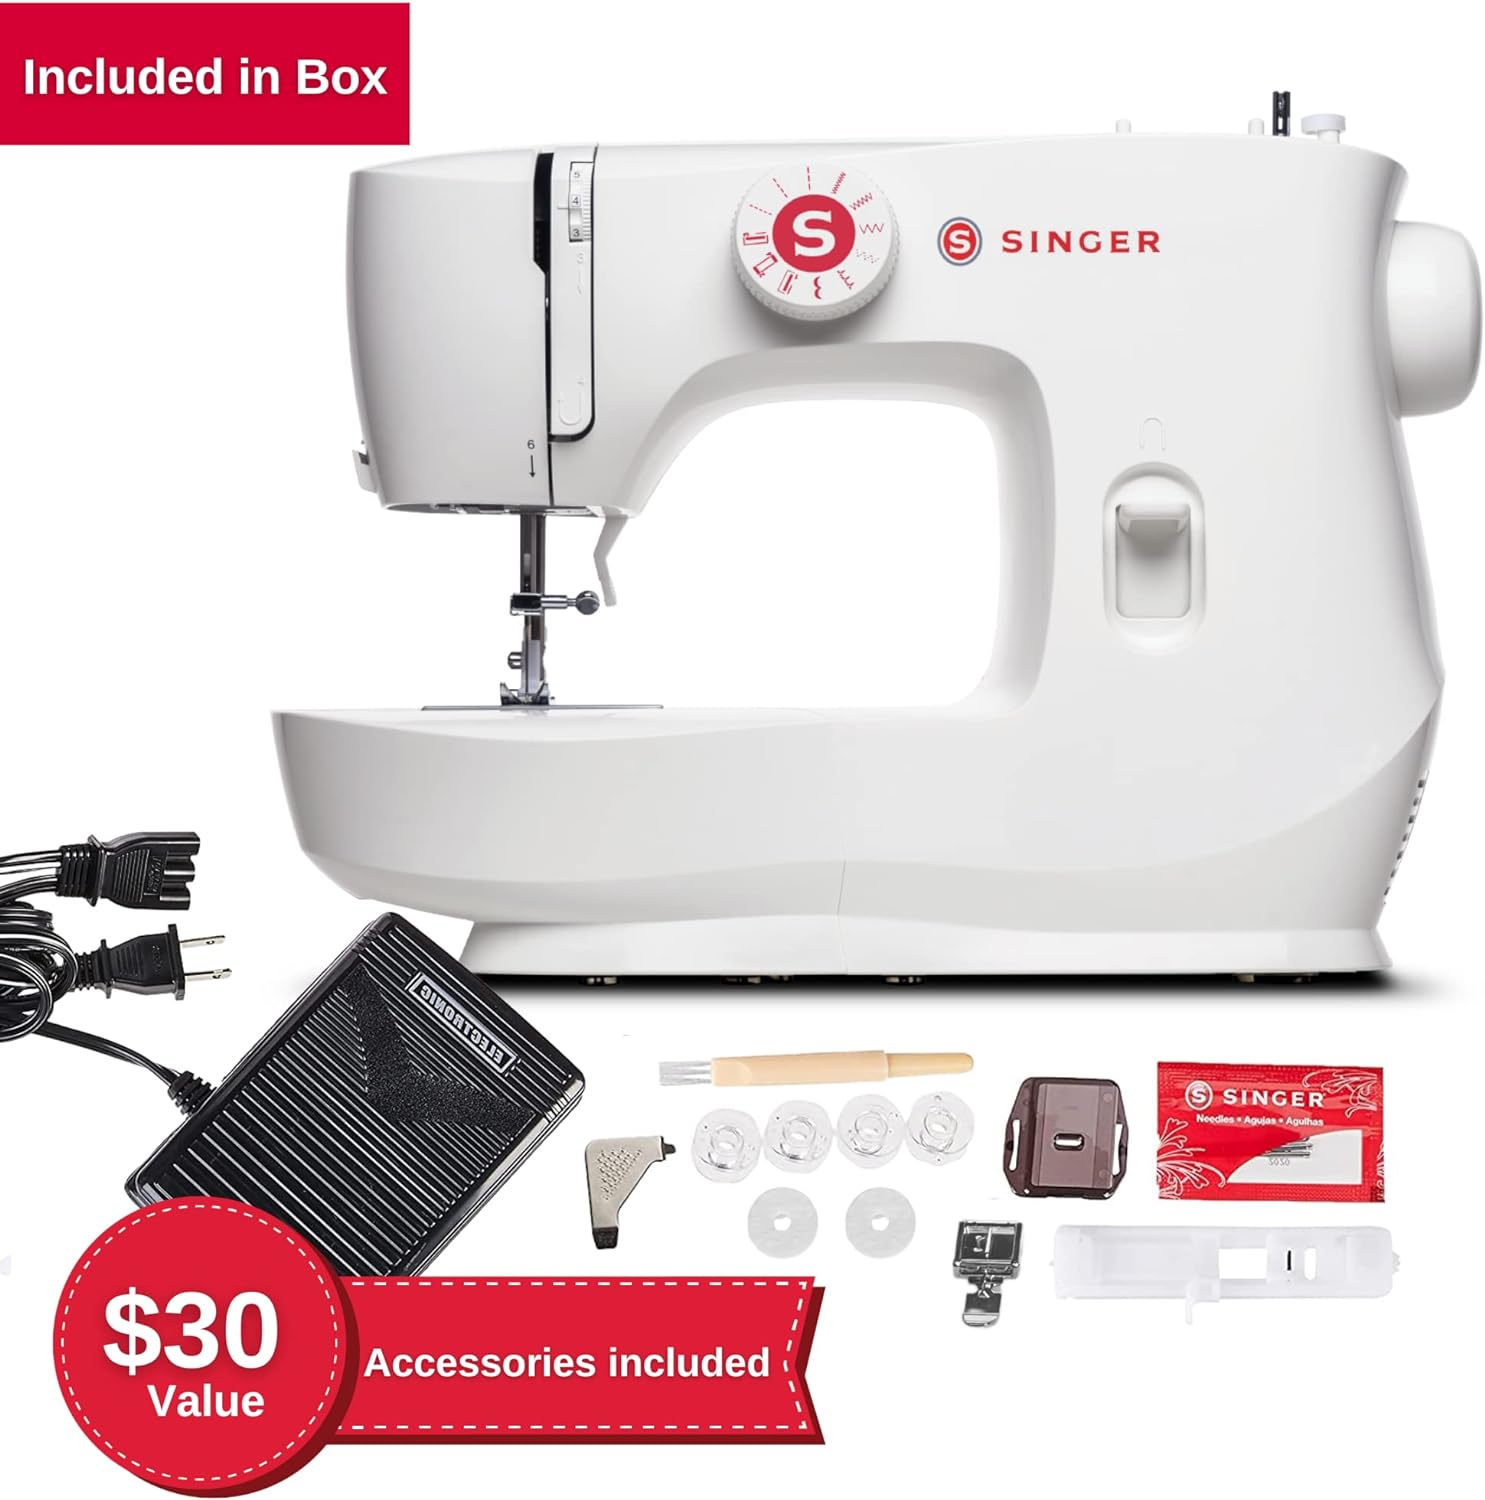 SINGER MX60 Sewing Machine Review